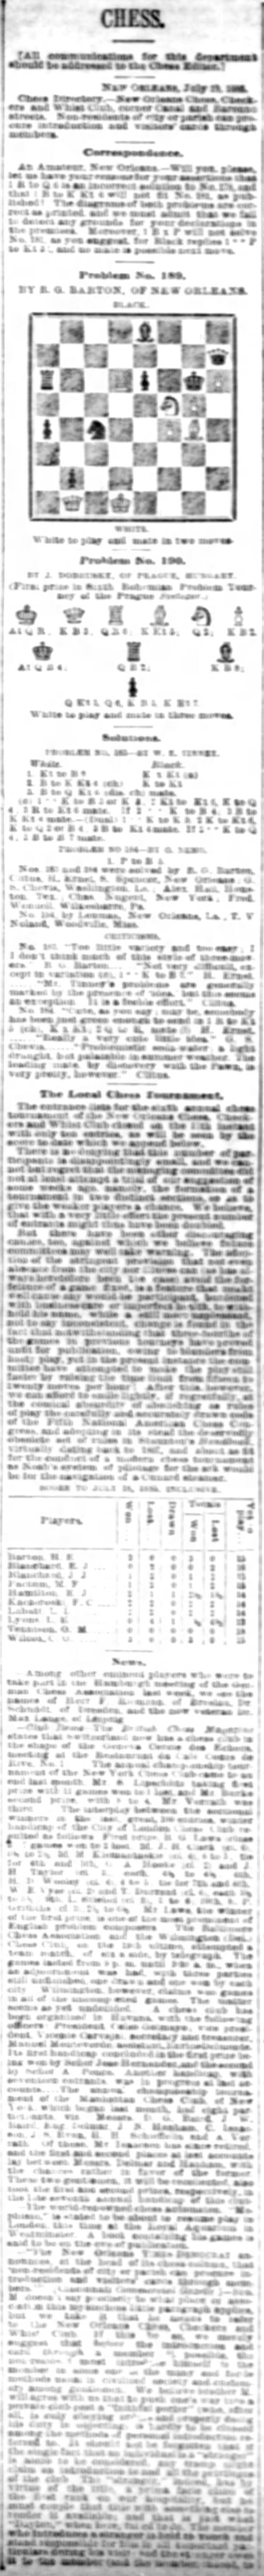 1885.07.19-01 New Orleans Times-Democrat.png